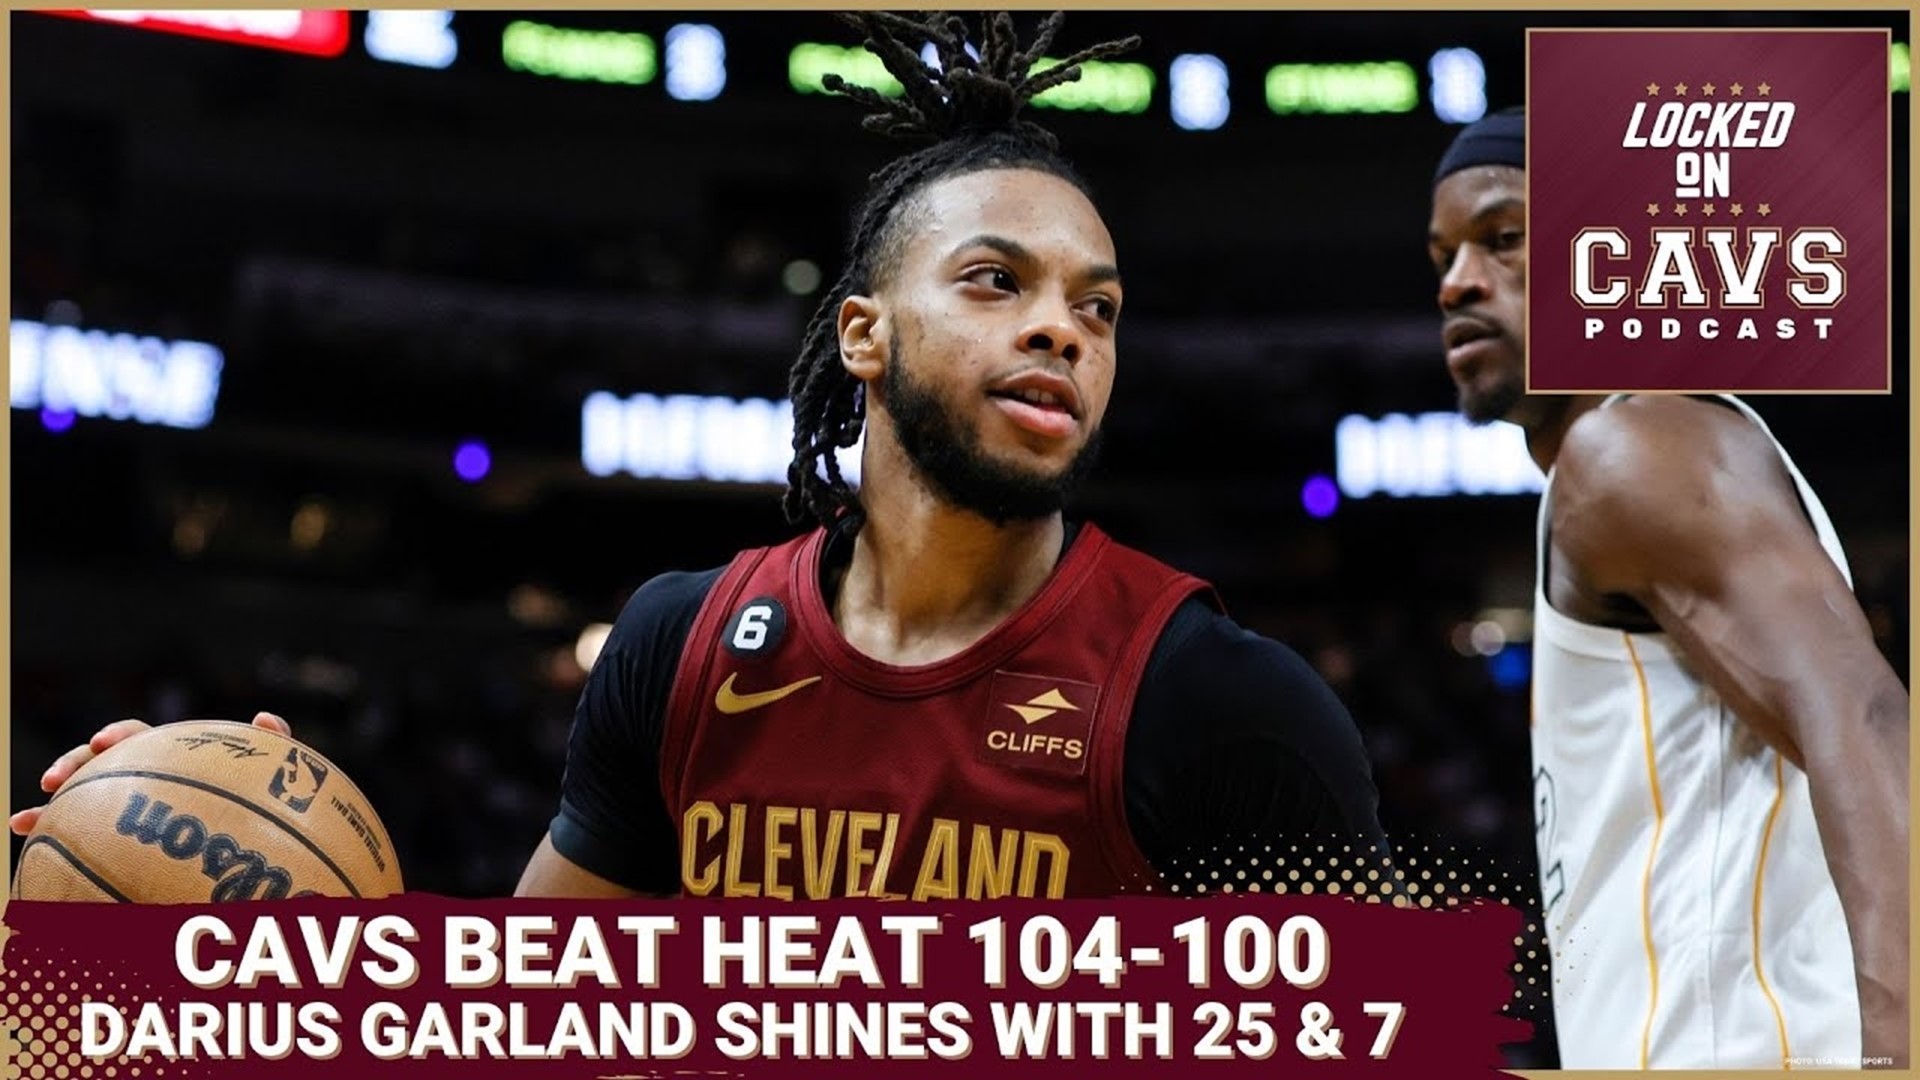 Hosts Chris Manning and Evan Dammarell discuss the Cleveland Cavaliers' 104-100 win over the Miami Heat.